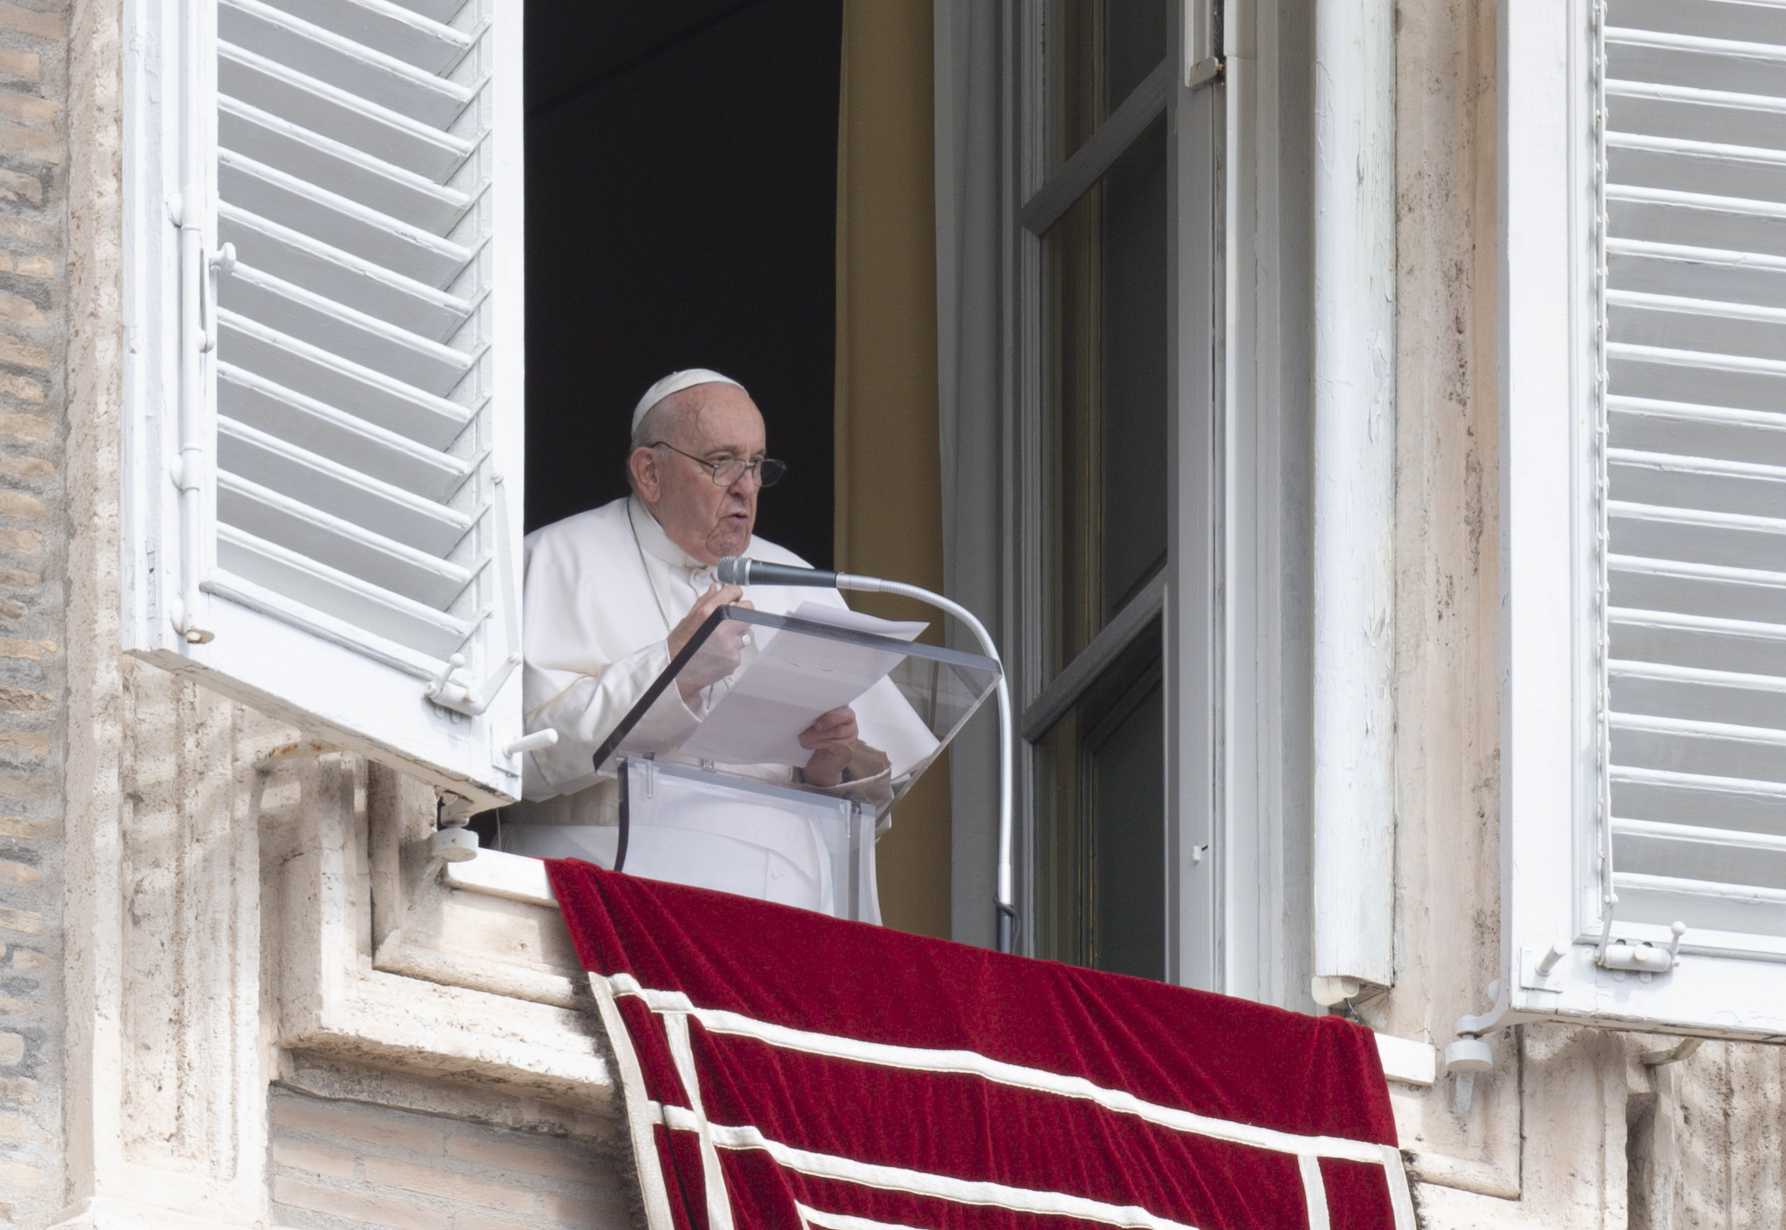 Jesus renews life, hope even when all seems lost, pope says